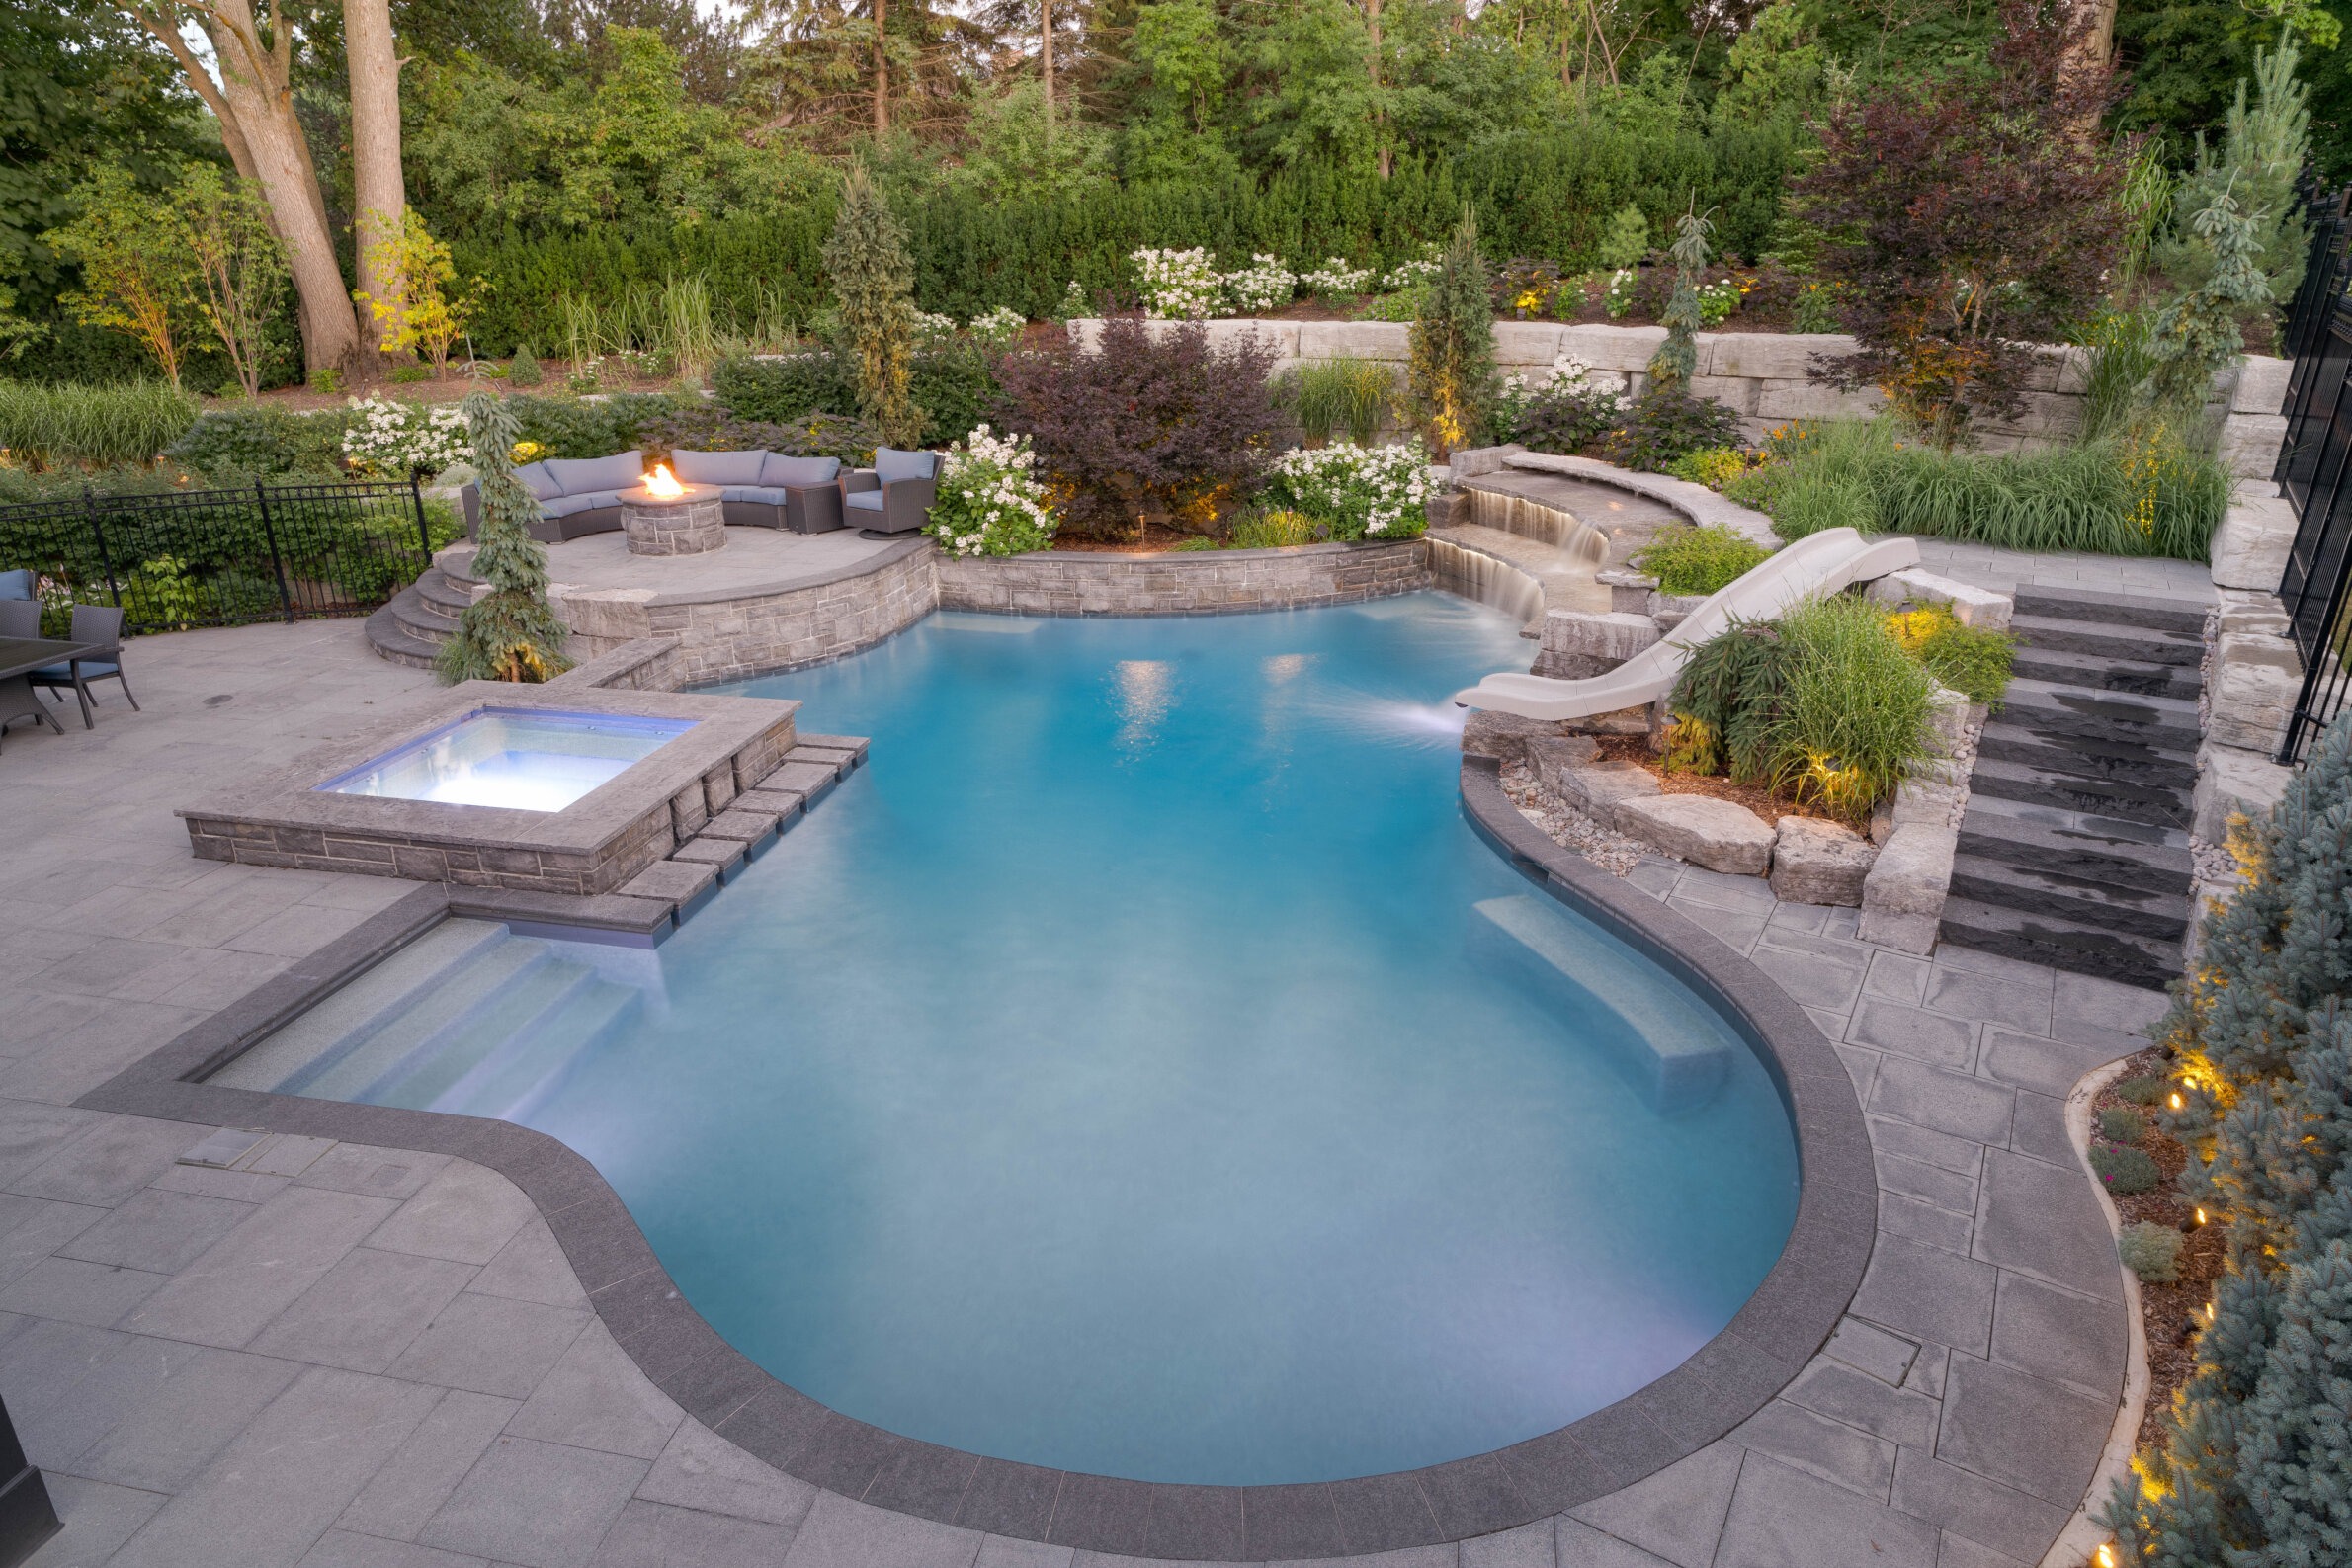 This image shows a luxurious backyard with a curved swimming pool, hot tub, stone patio, fire pit, and a waterslide amid landscaped greenery at dusk.